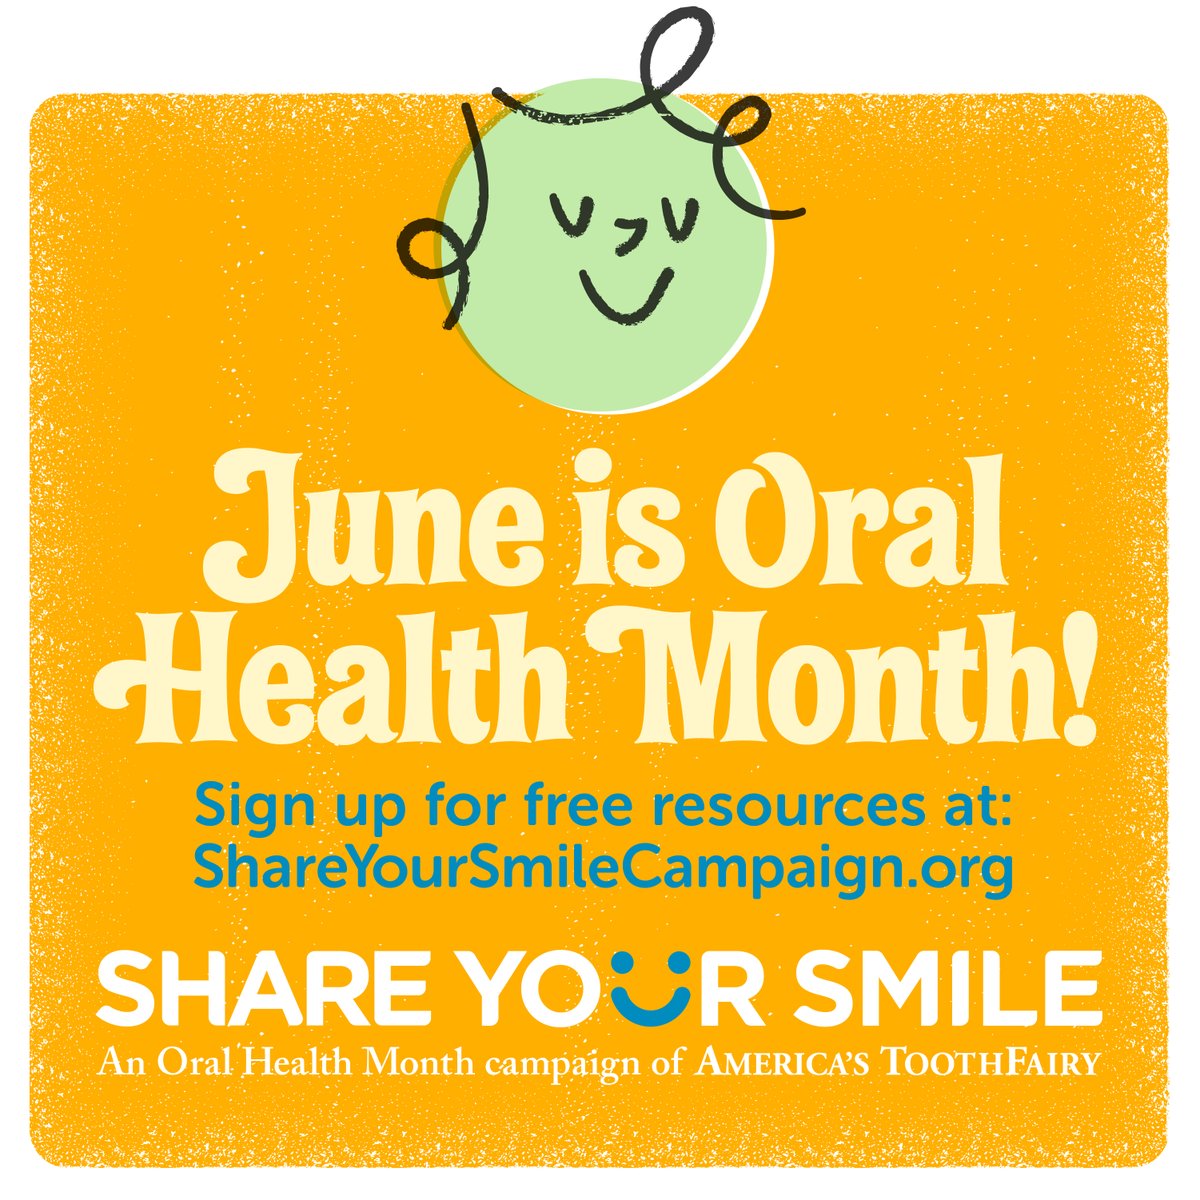 To celebrate #OralHealthMonth in June, we're partnering with @DentaQuest & @SunLife to spread awareness about how your smile affects yourself and others and oral health disparities that exist in marginalized communities.
Join us at ShareYourSmileCampaign.org
#ShareYourSmile